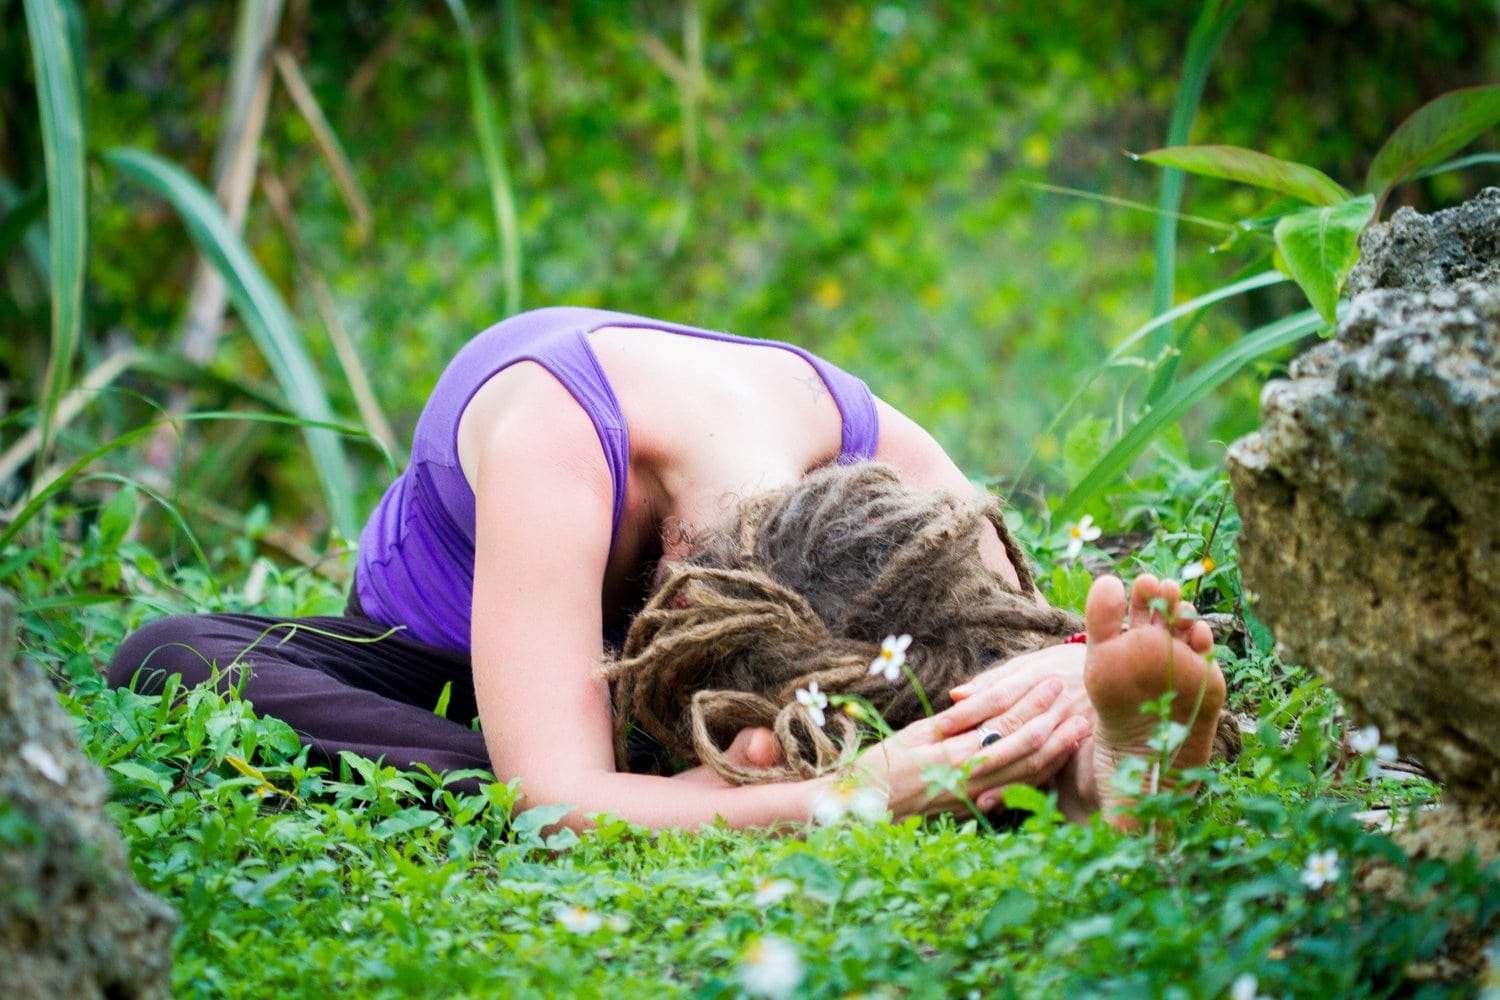 5 Sweet Steps to Yoga, Periods & Mindfulness